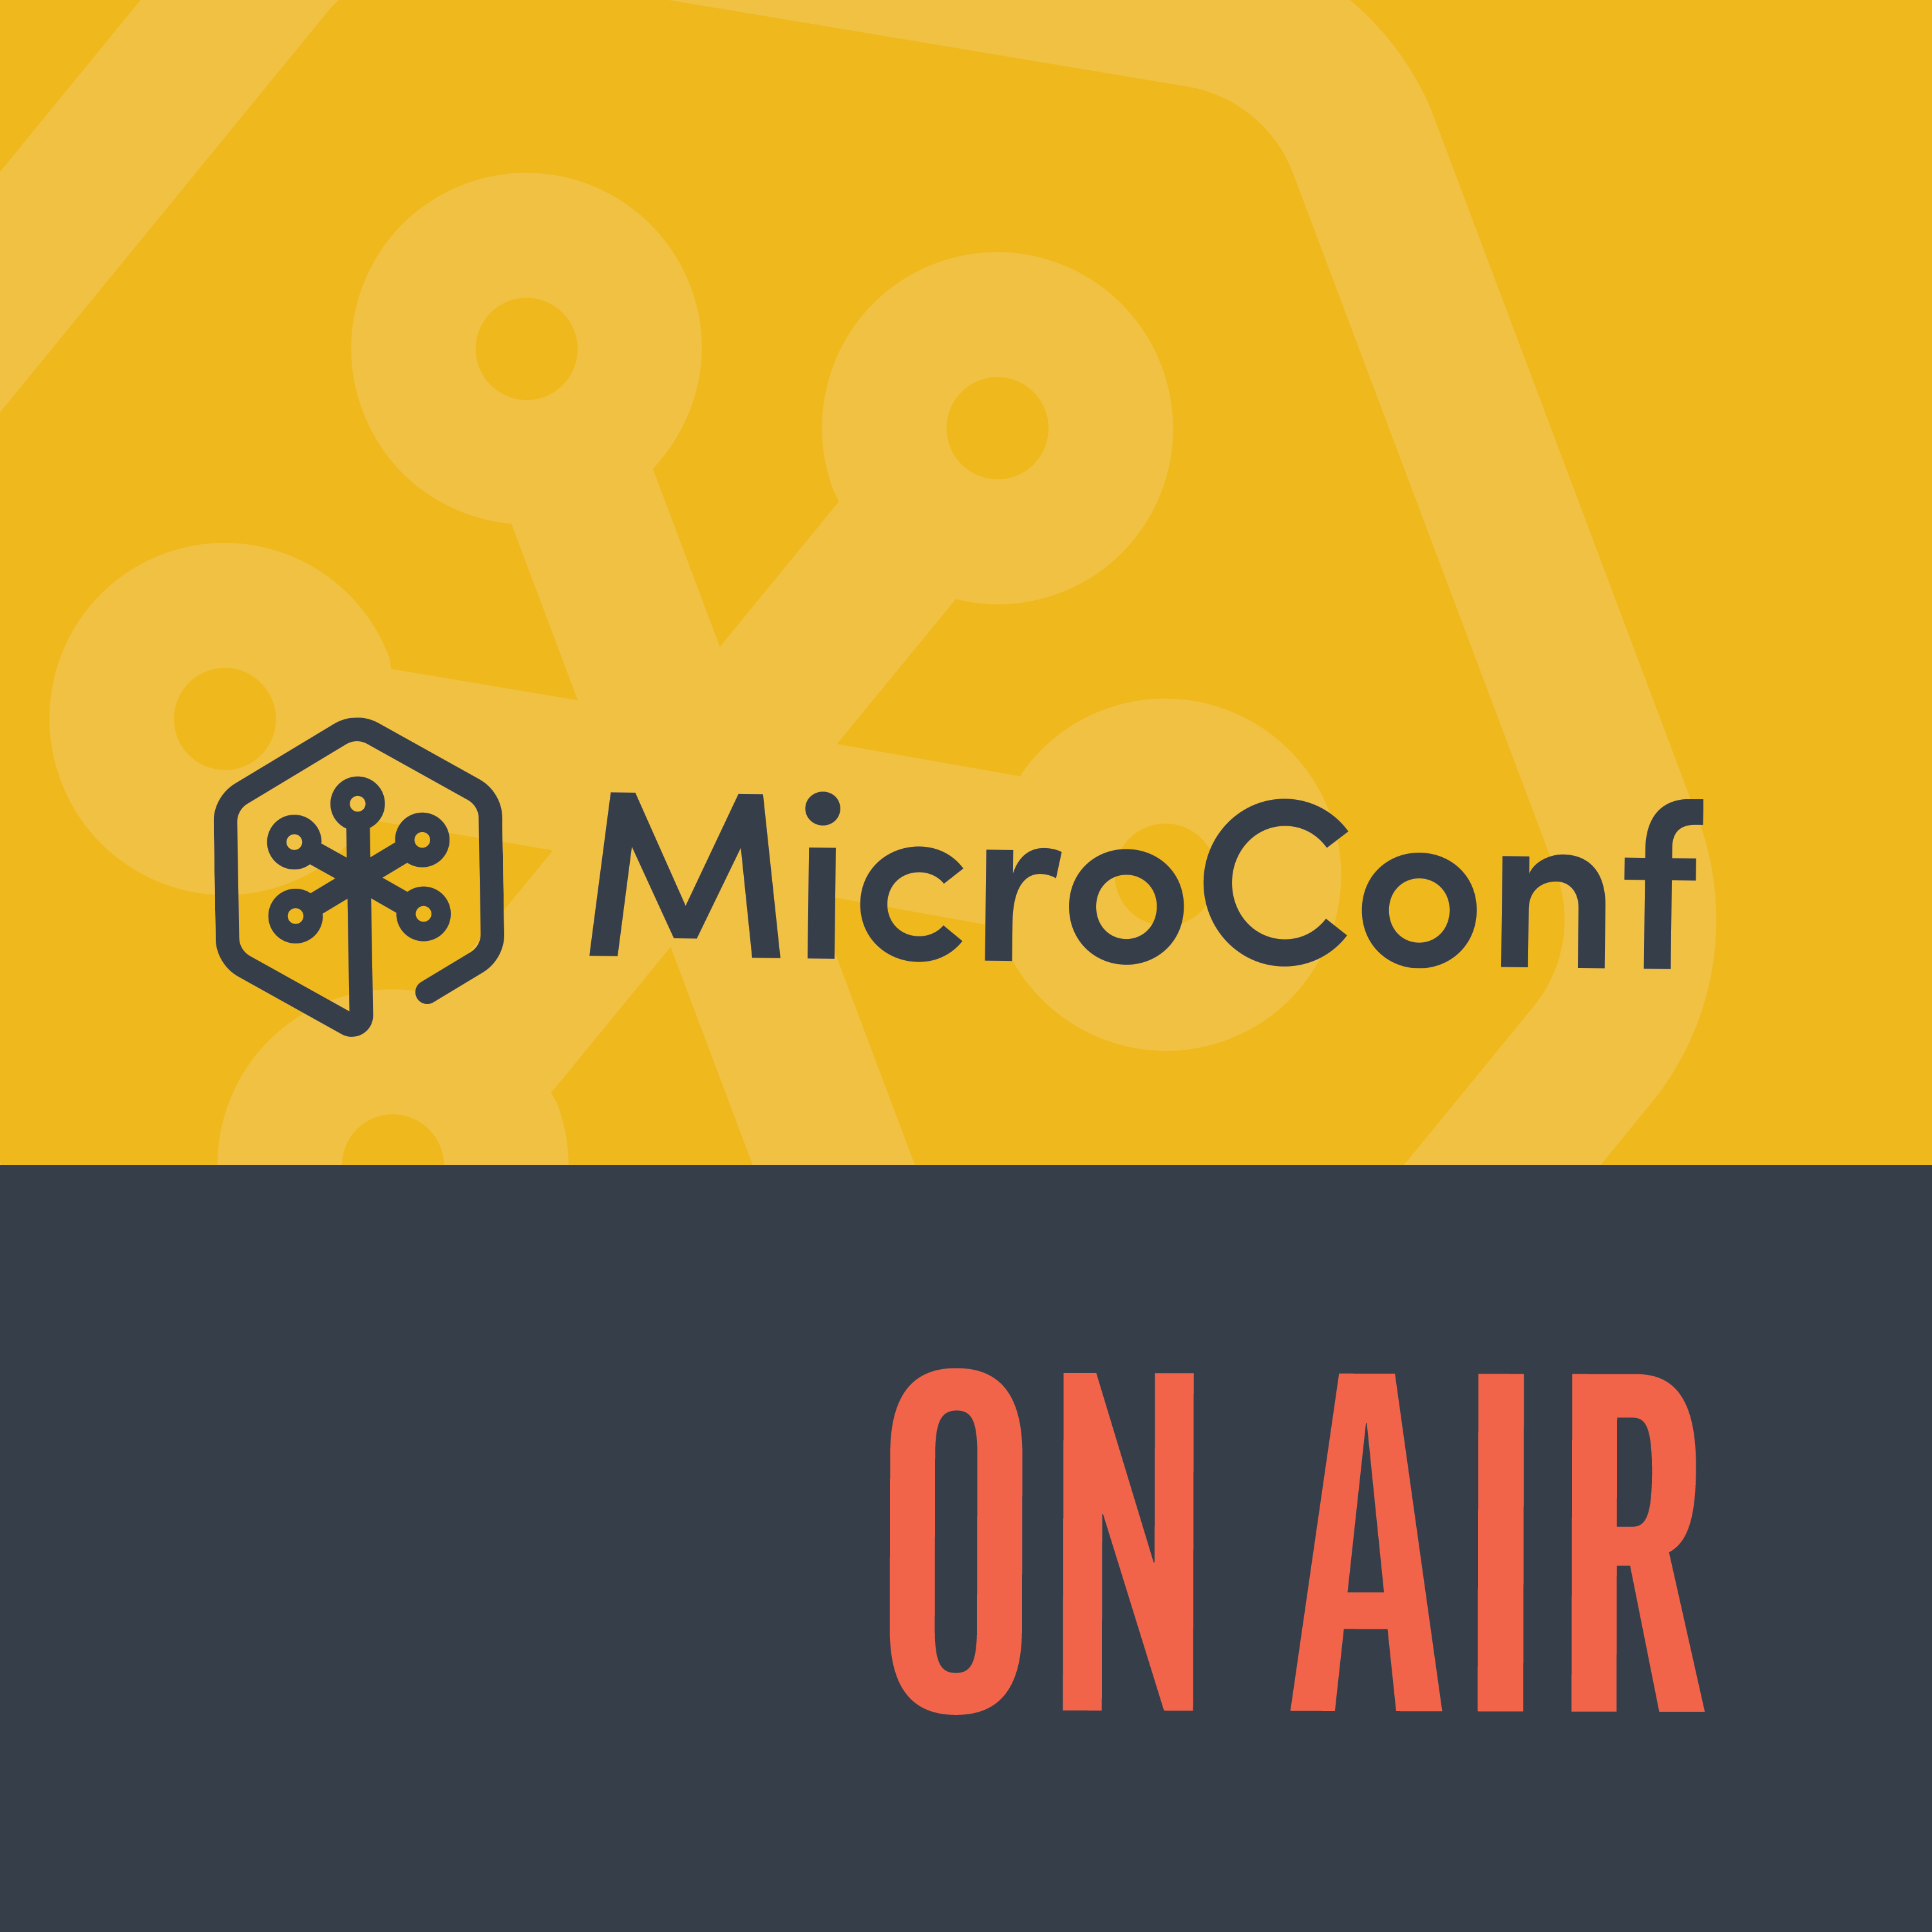 MicroConf Refresh Episode 36: Reaching the Top of Product Hunt with Derrick Reimer